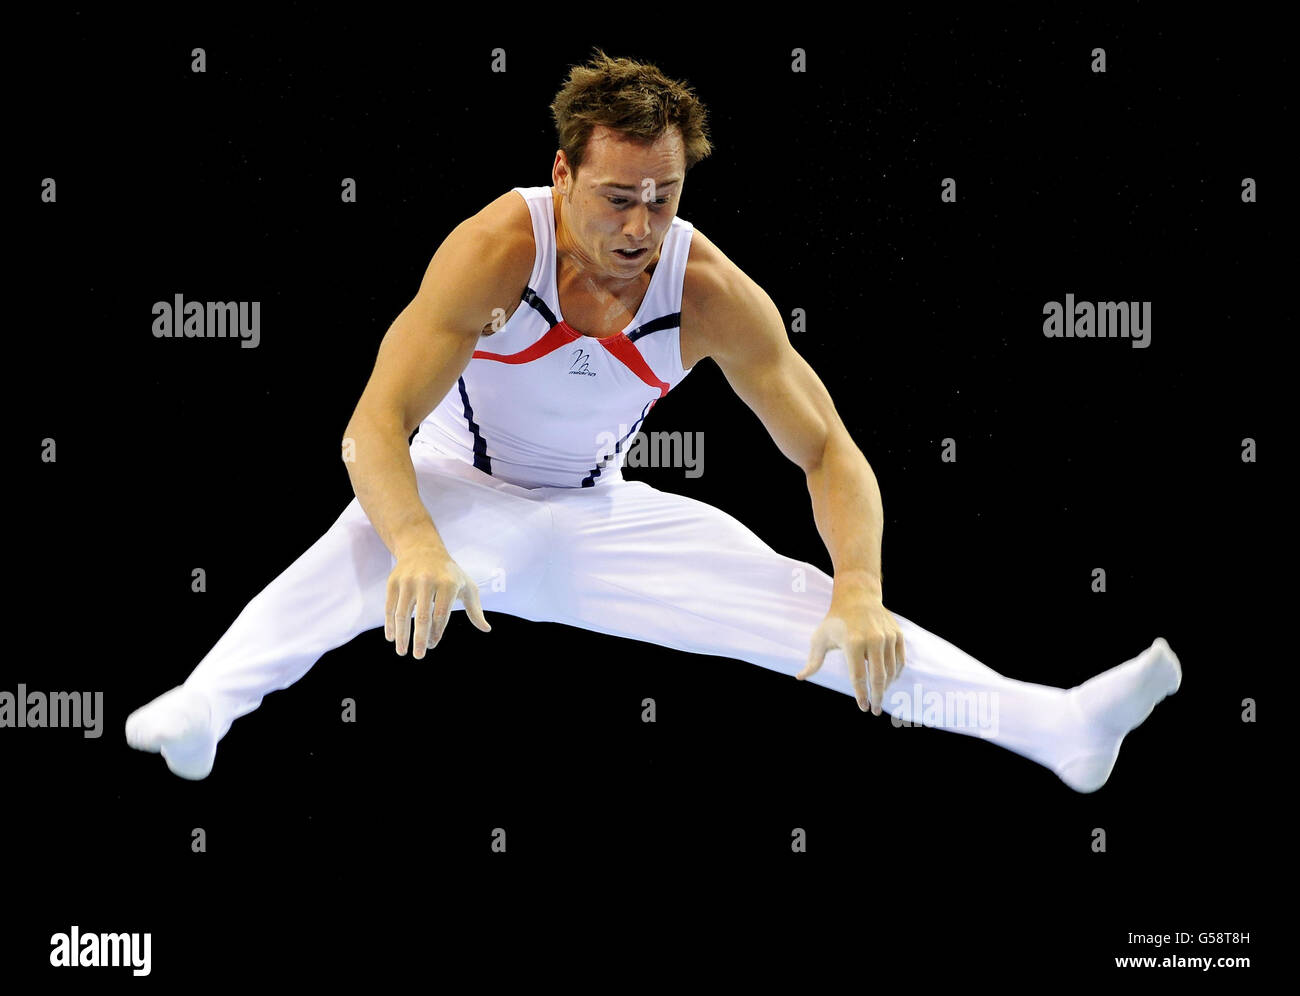 Huntingdon Olympic gymnastics club's Daniel Keatings performing on parallel bars during the individual apparatus finals during the Men's and Women's Artistic Gymnastics British Championships at the Echo Arena, Liverpool. Stock Photo